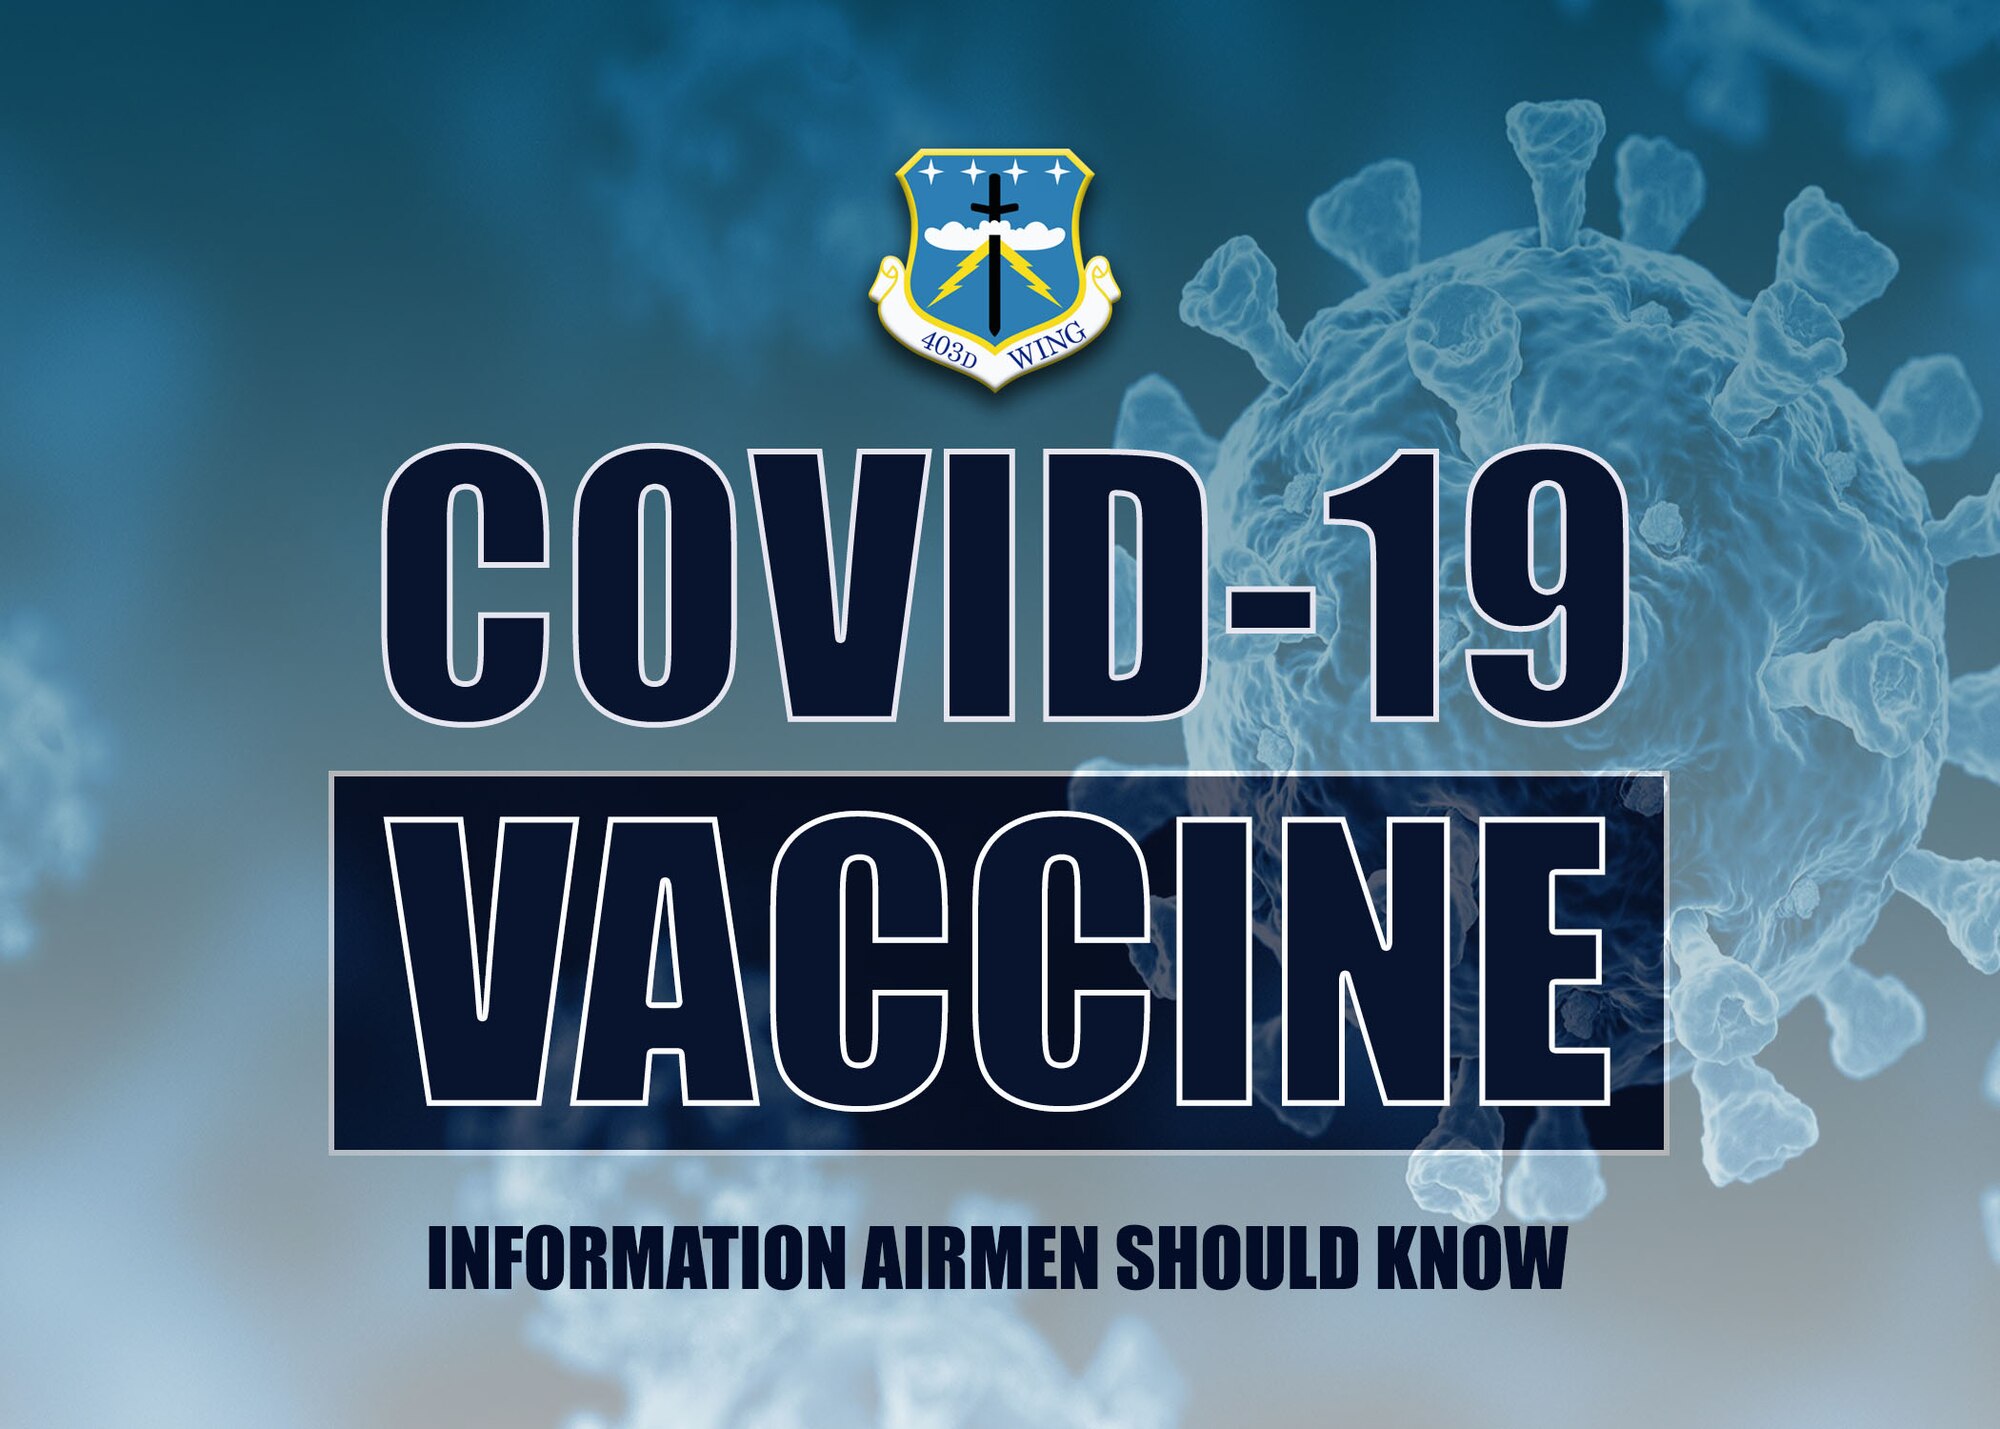 During the Unit Training Assembly, Aug. 7-8, 2021, the 403rd Wing hosted two COVID-19 vaccine educational sessions to provide its Reserve Citizen Airmen with information about the science and facts of the vaccine and to provide them with an opportunity to ask questions to assist them with making fully informed decisions about getting vaccinated. (U.S. Air Force graphic/Lt. Col. Marnee A.C. Losurdo)